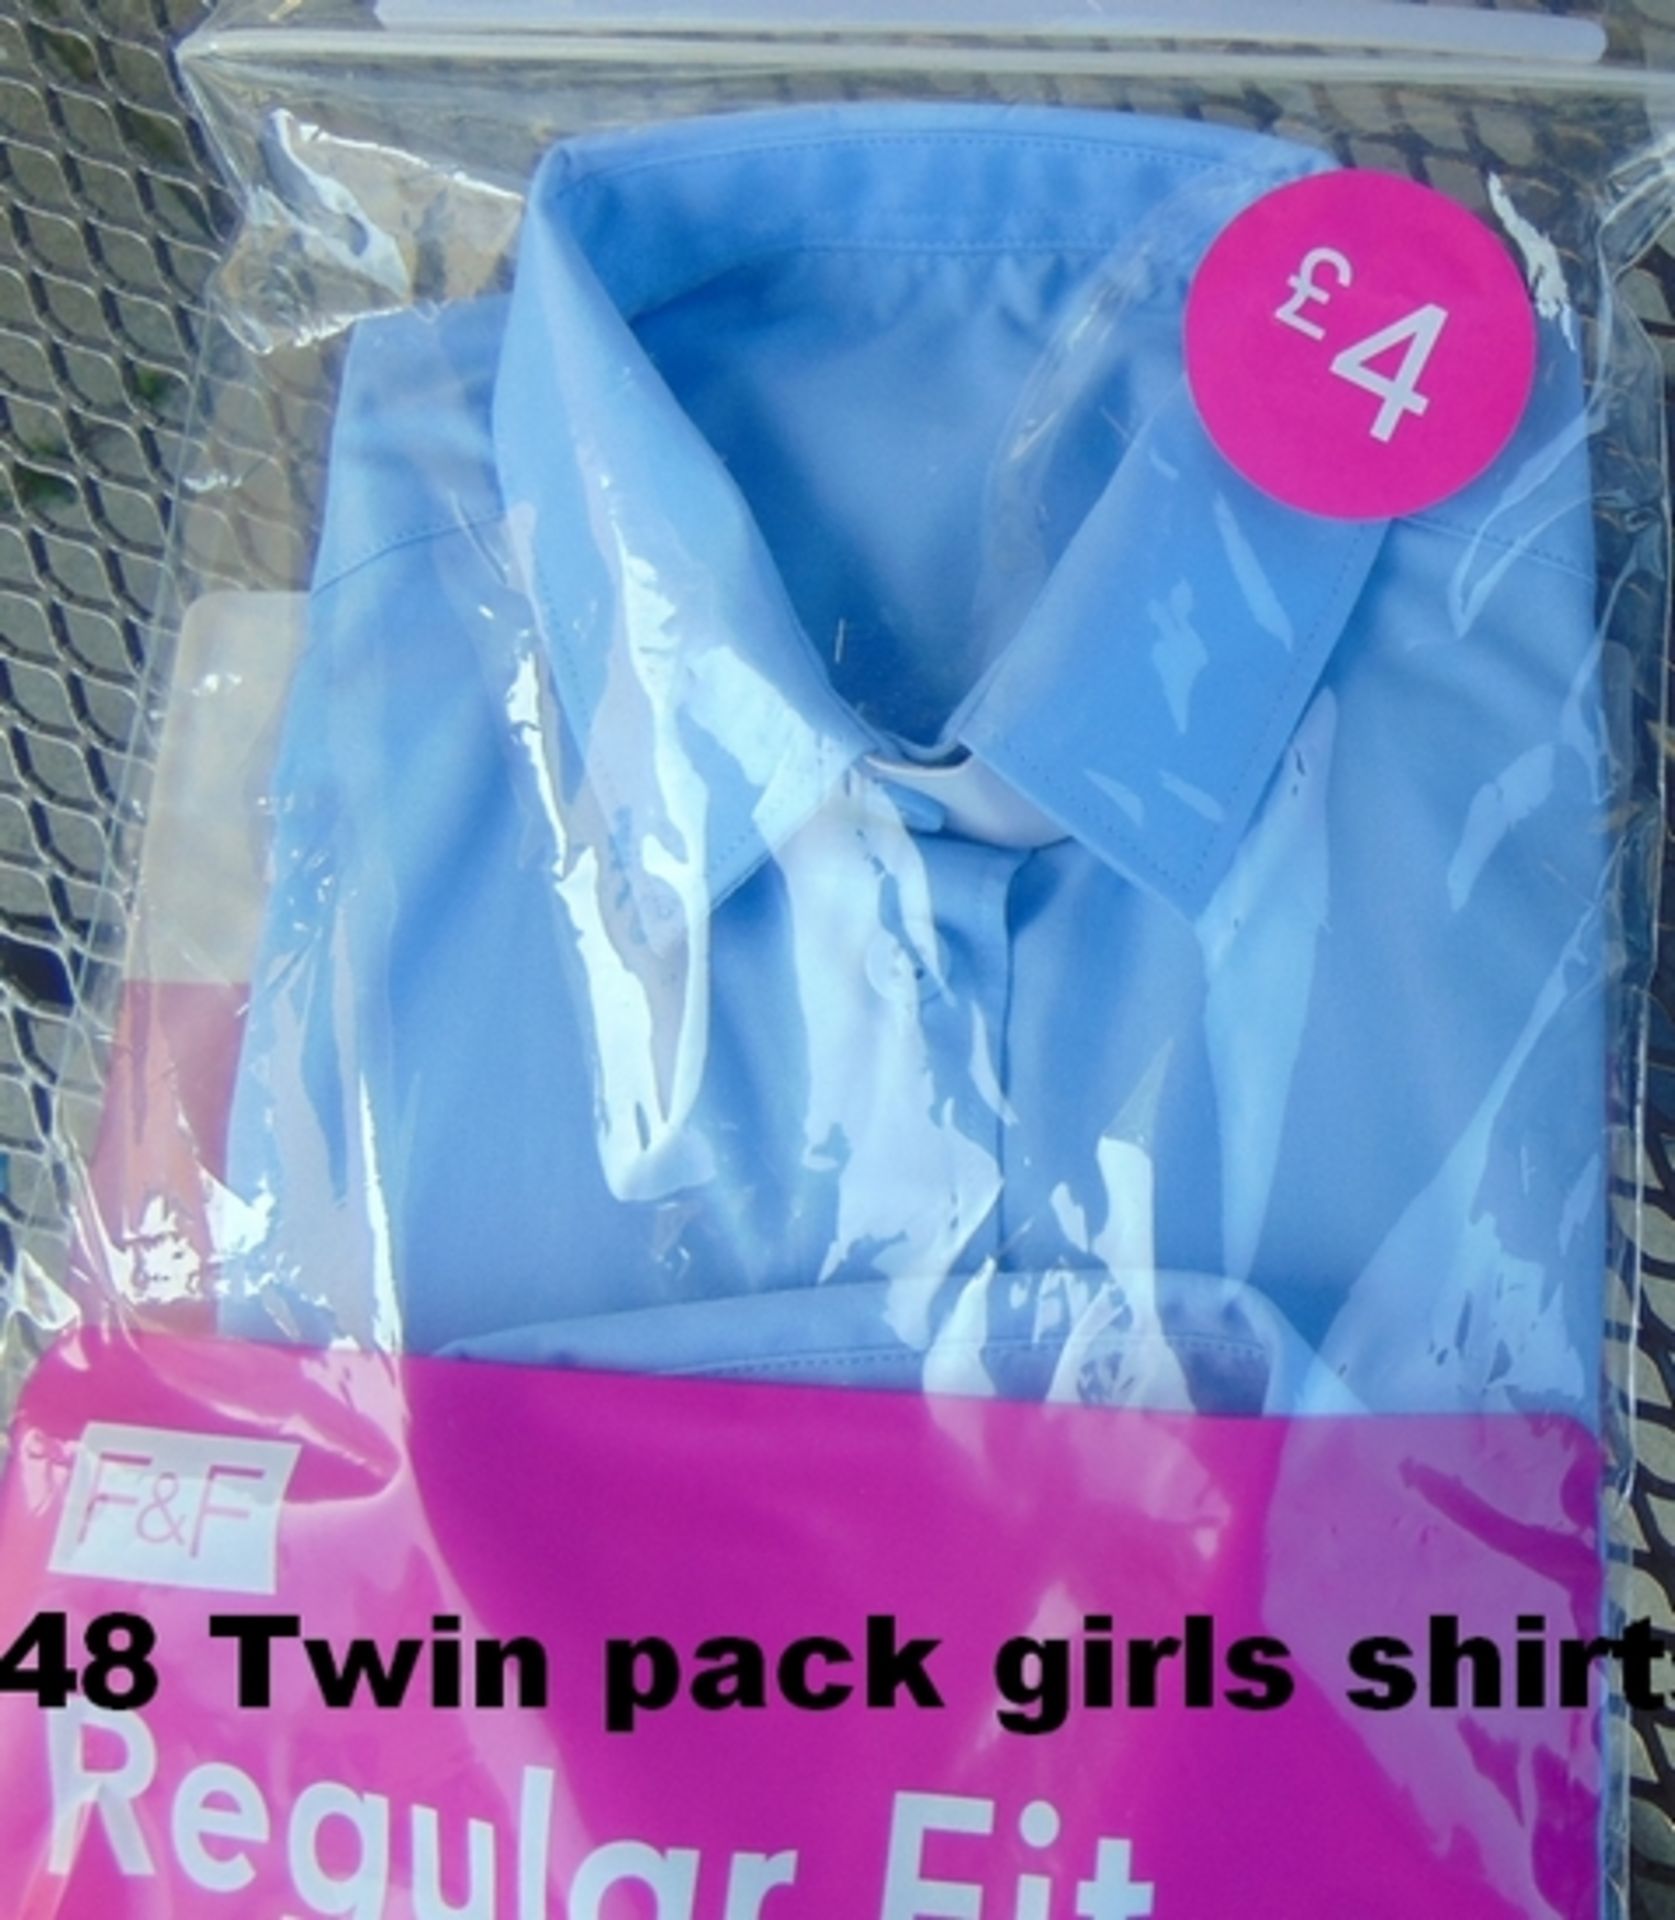 48 mixed girls and boys twin packs of shirts sizes from 5 to 13. - Image 3 of 3